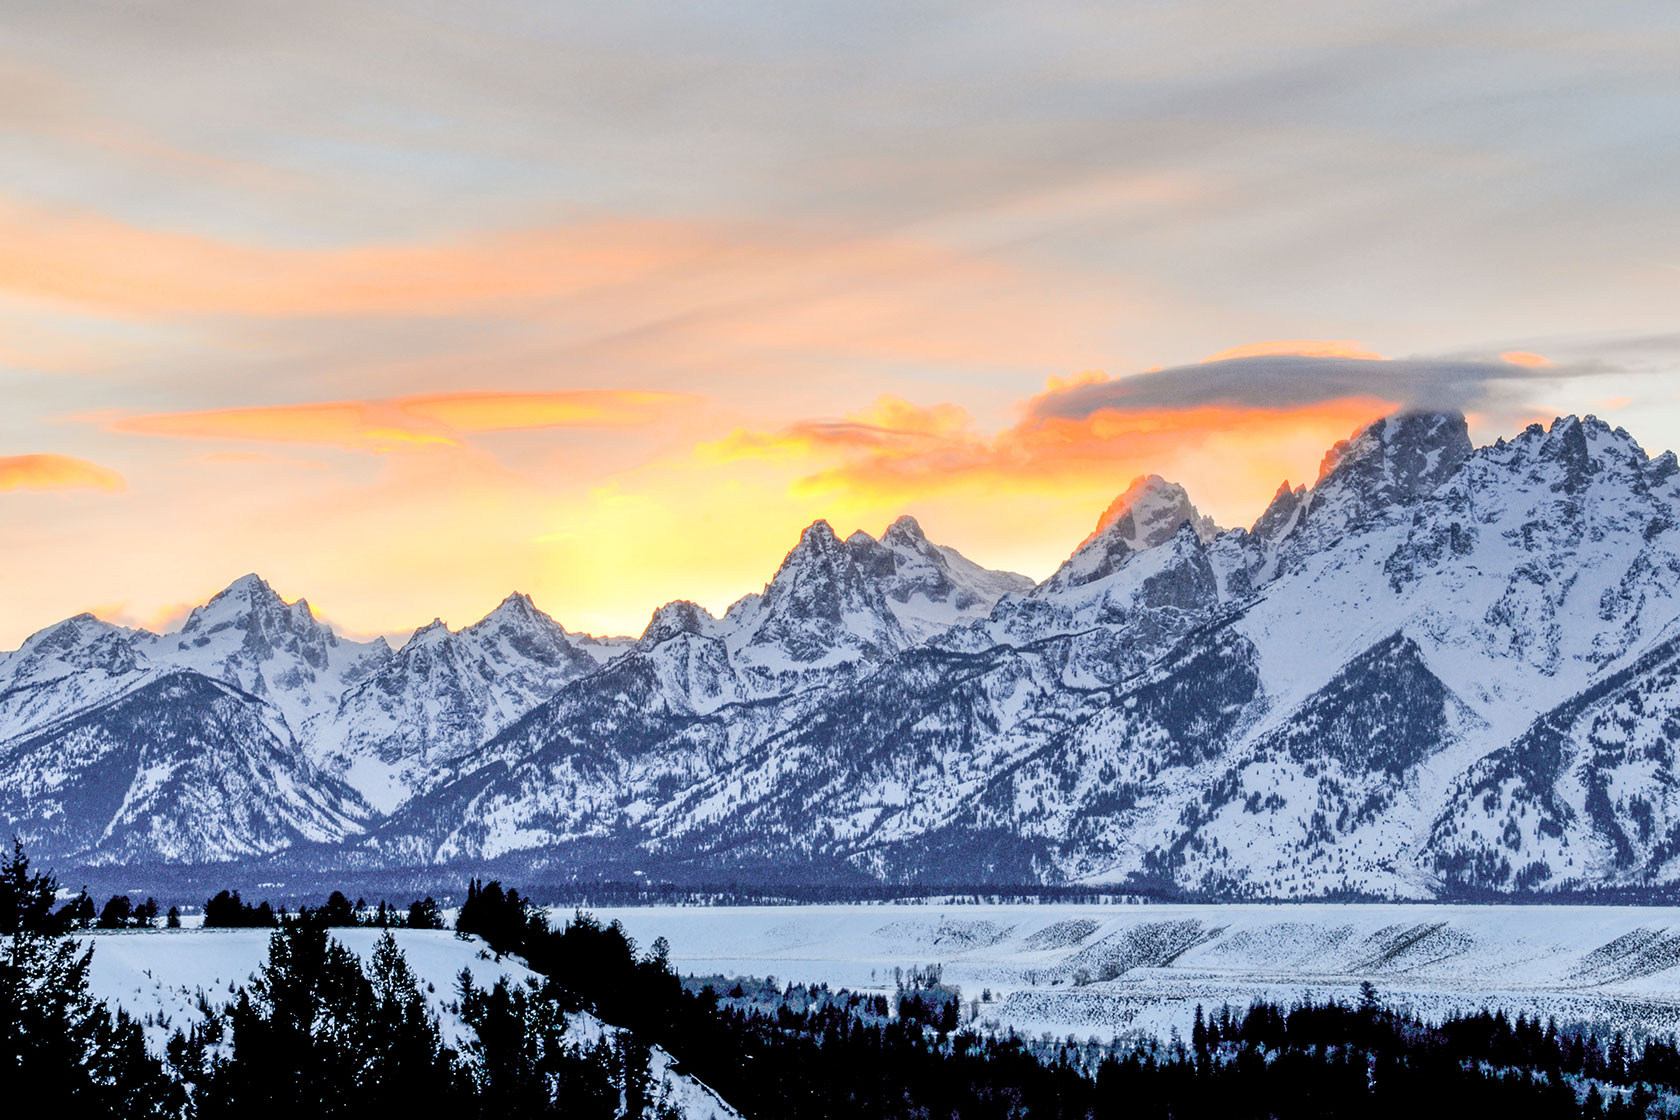 Snake River Overlook at Sunset - Stephen Williams Photography, Jackson Wyoming